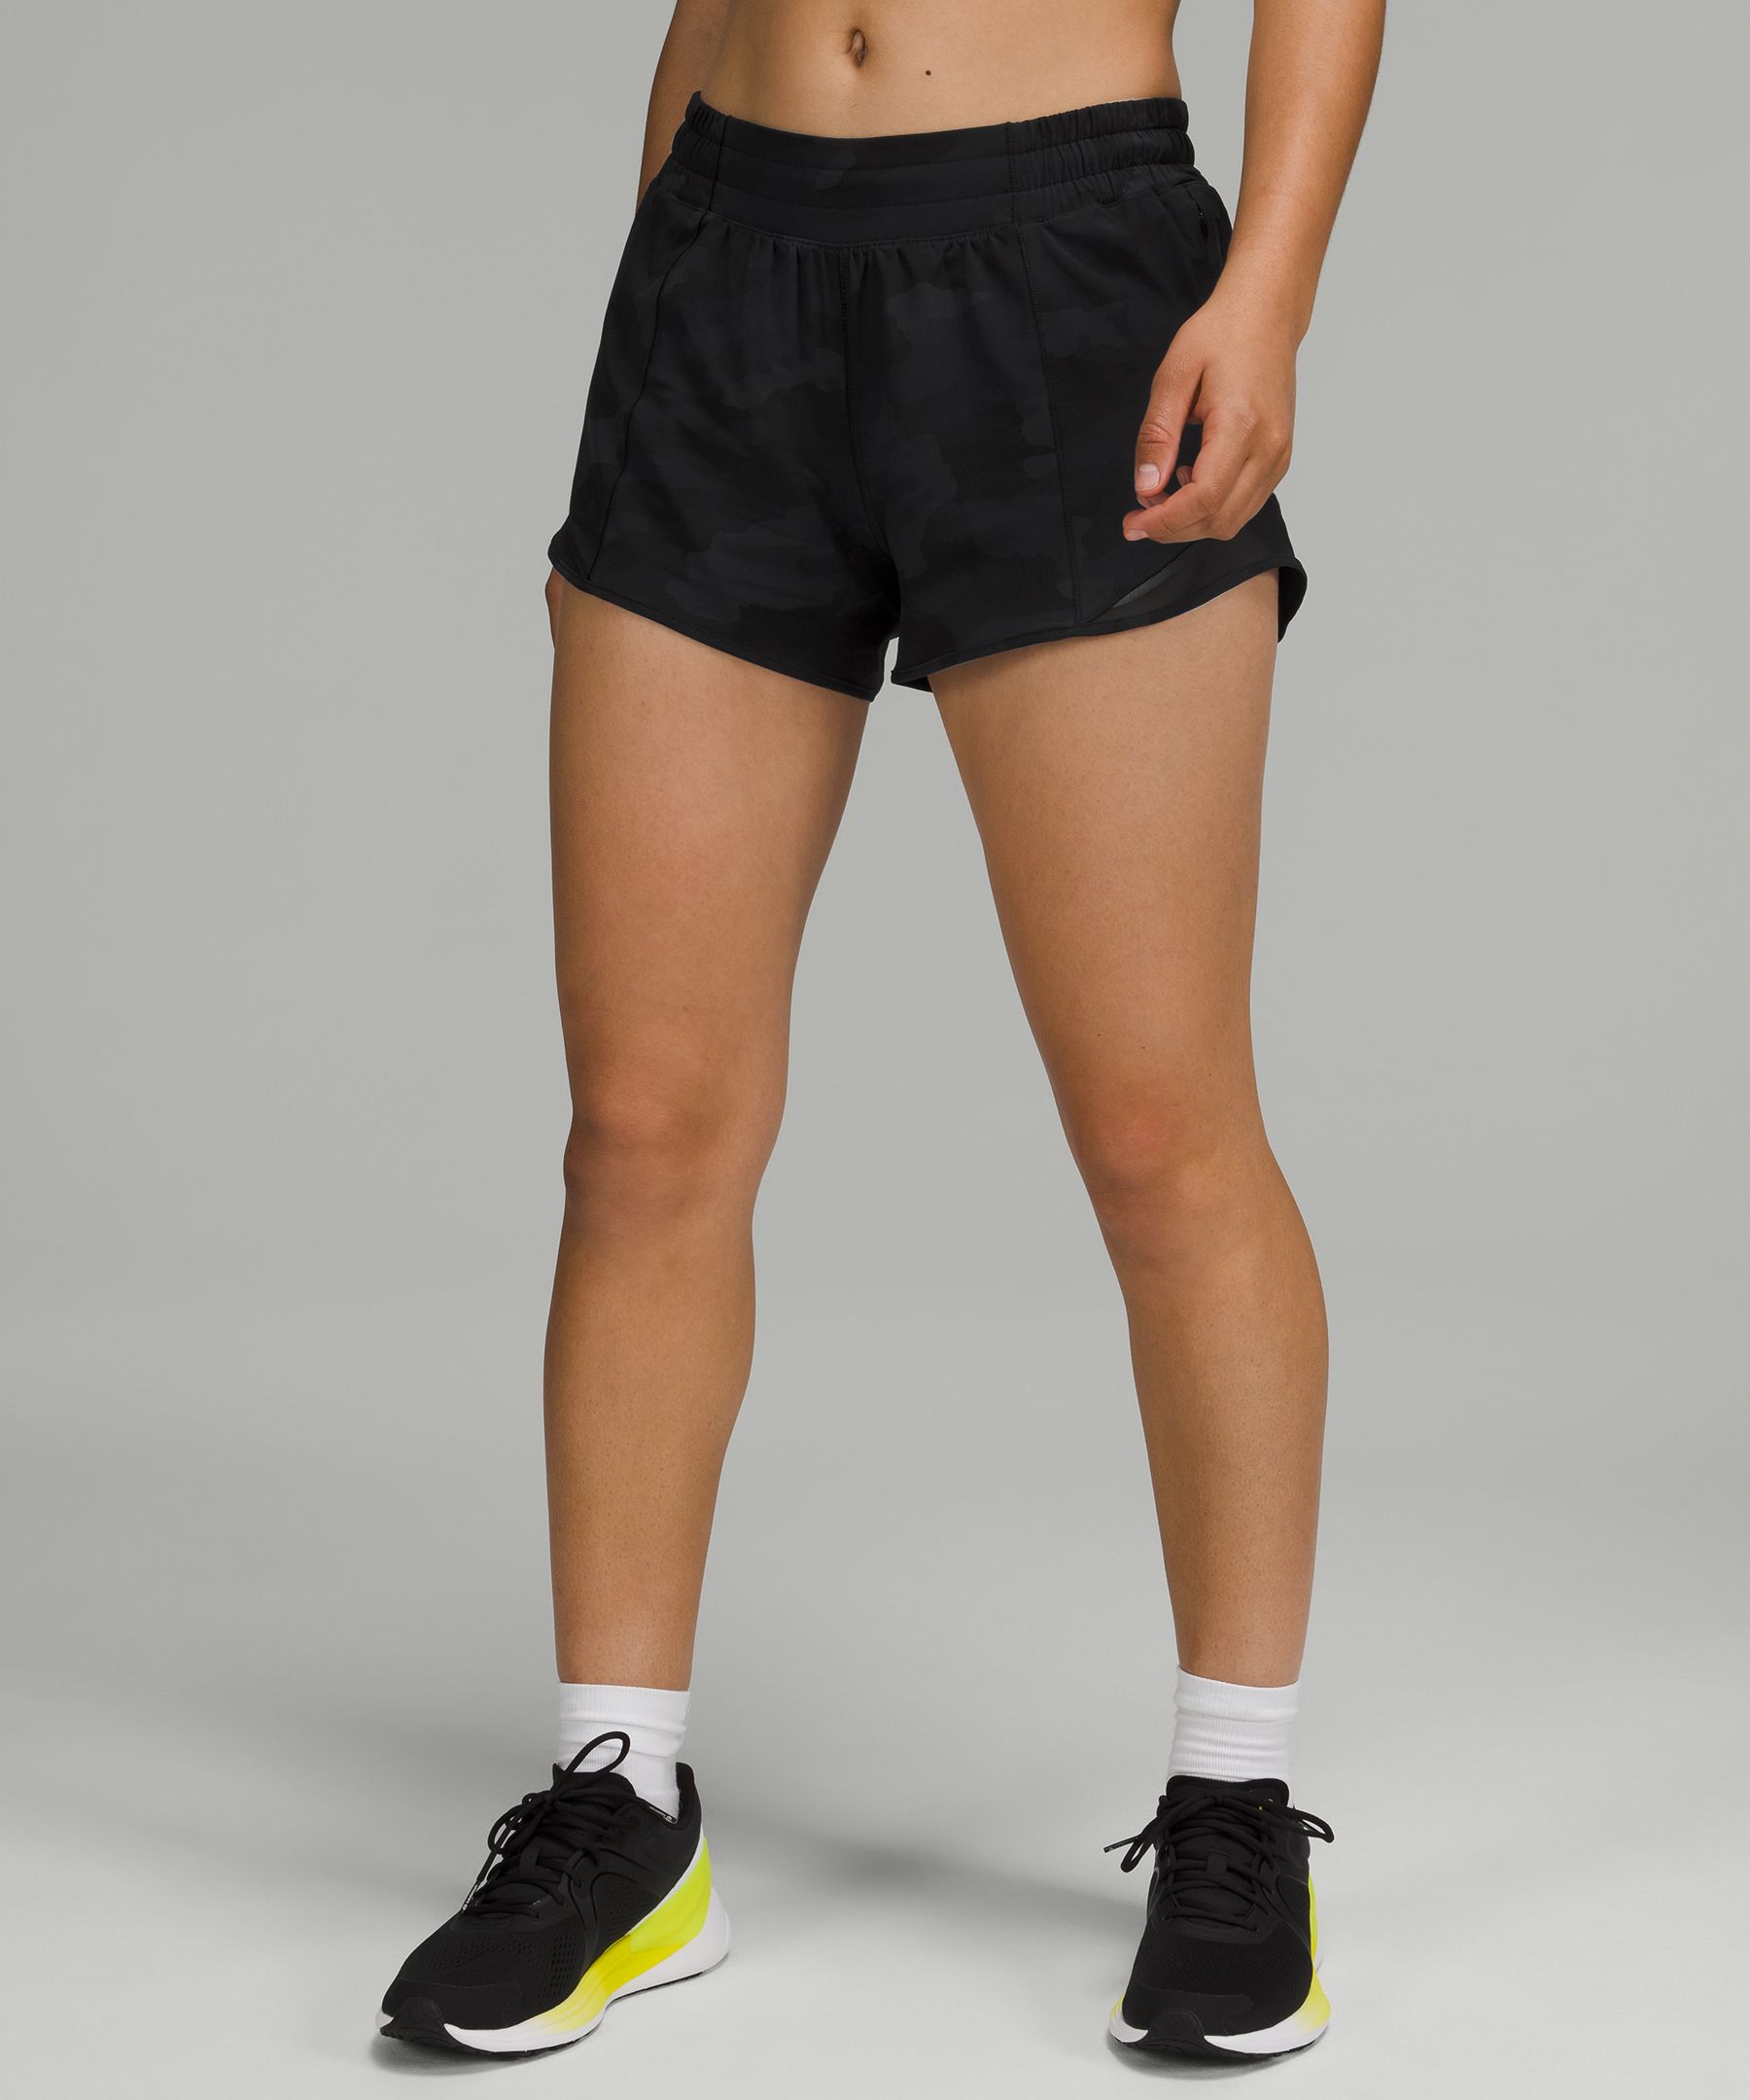 Lululemon Hotty Hot Low-rise Lined Shorts 4" In Heritage 365 Camo Deep Coal /black